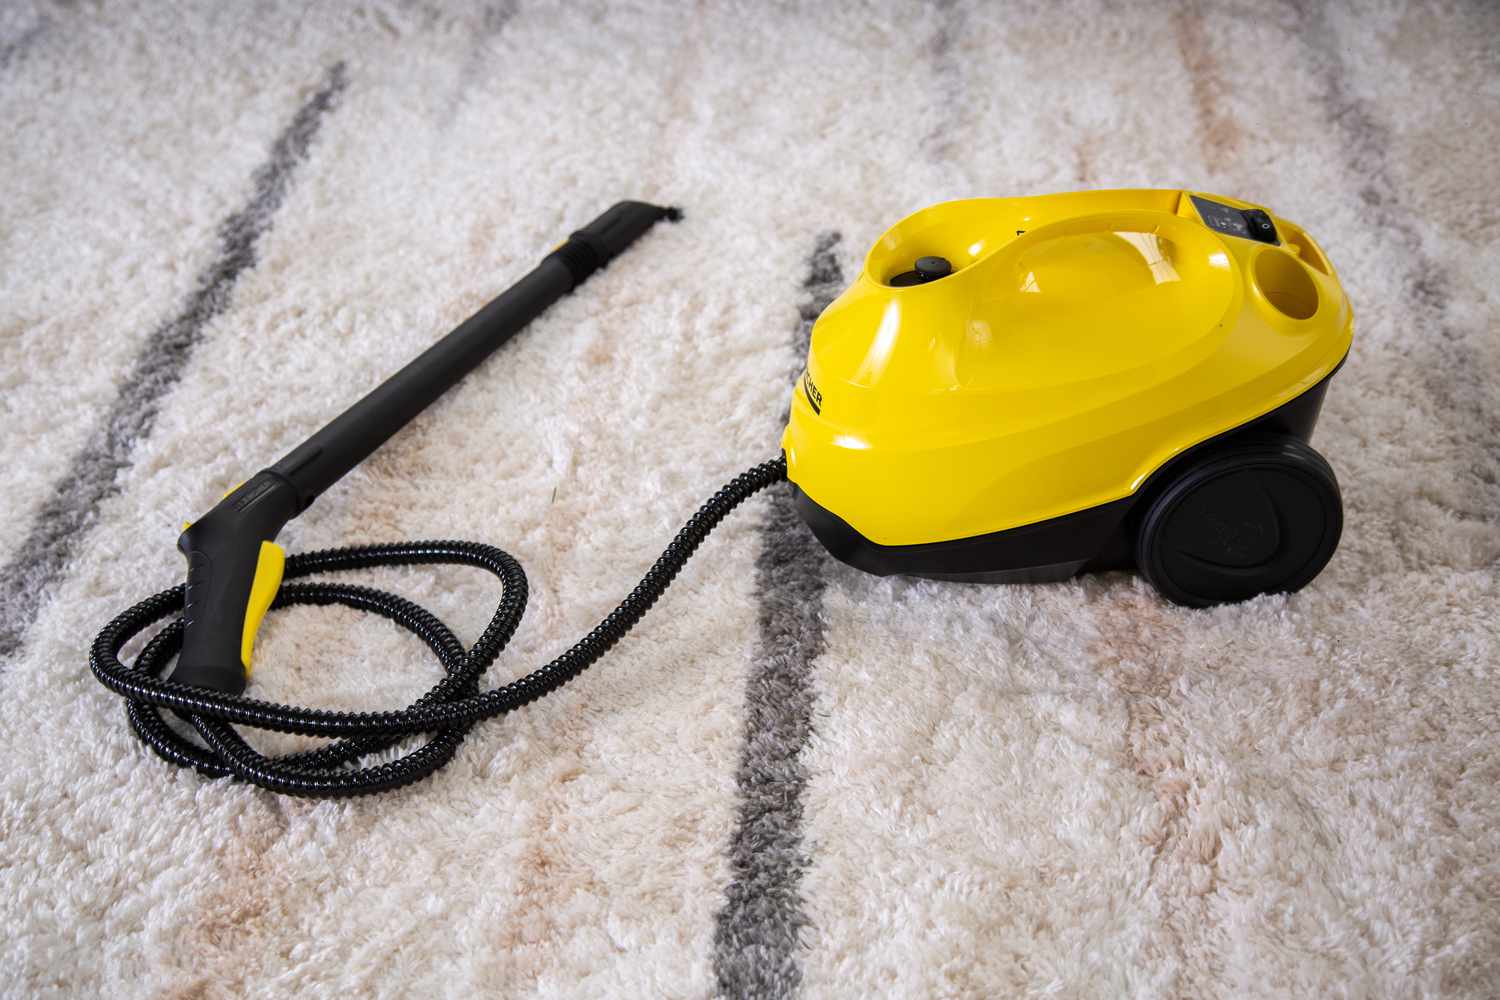 Steam Cleaner: Overview